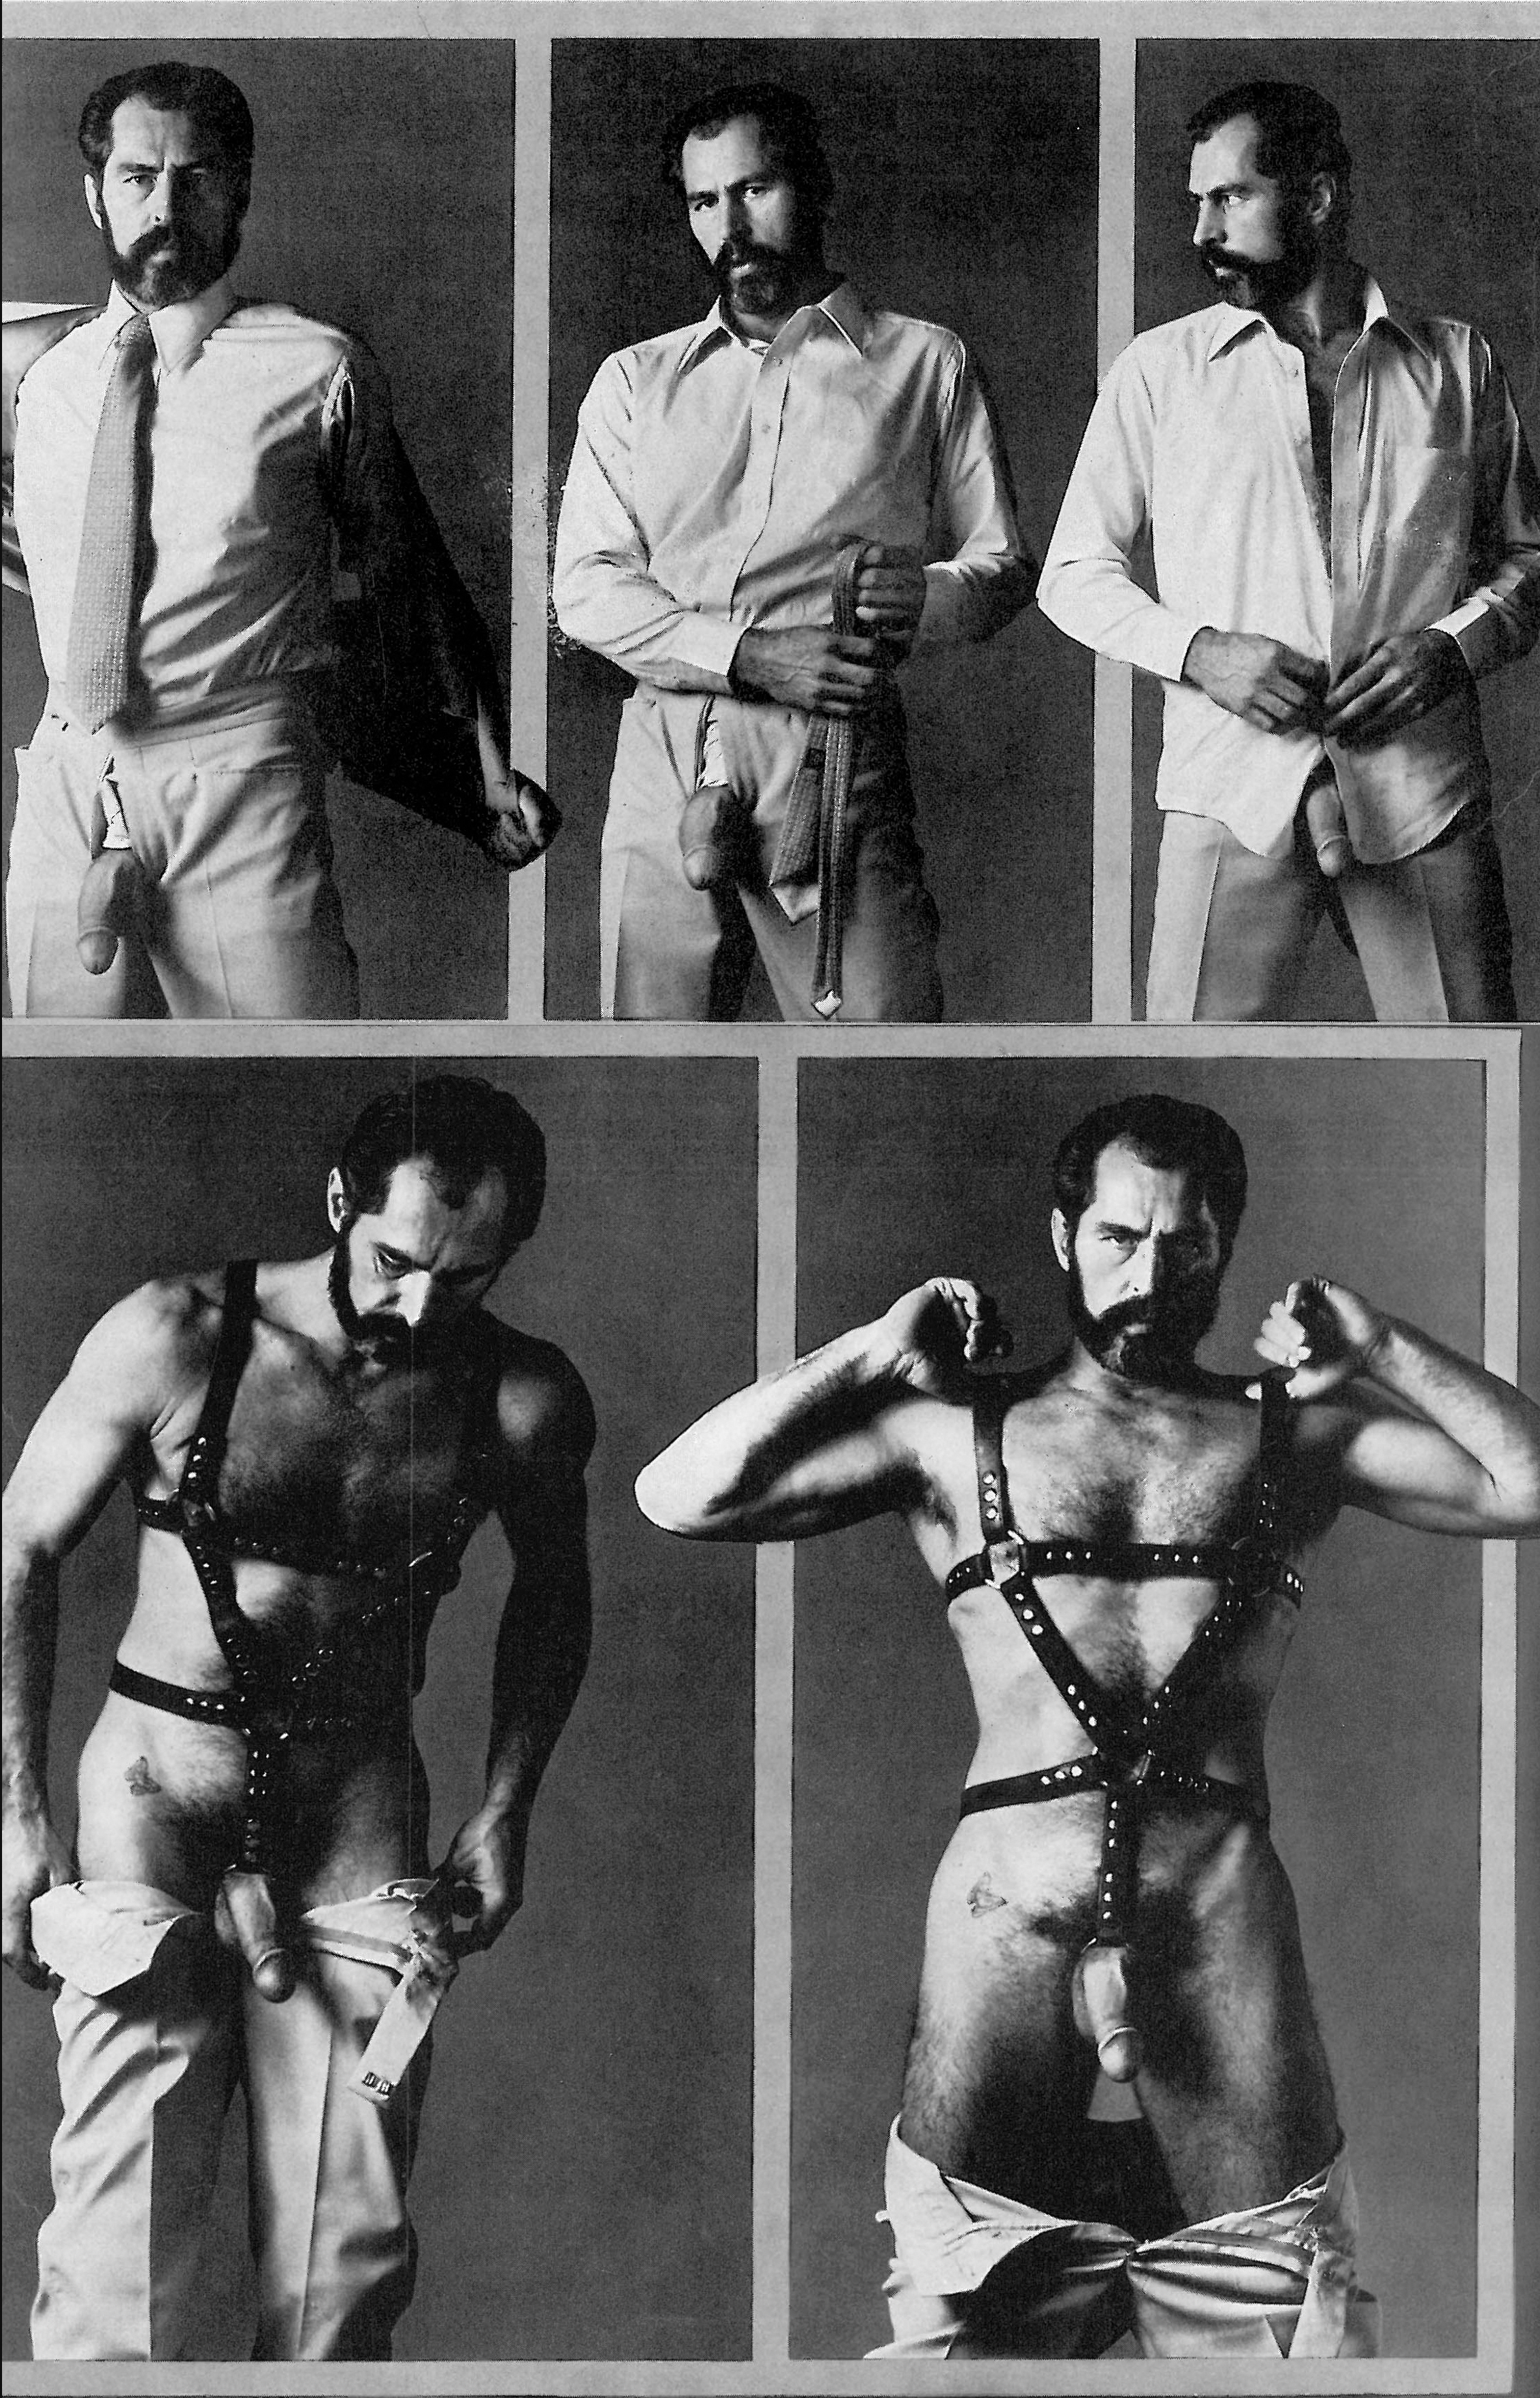 Photospread of Richard Locke stritease from suit and tie to leather harness